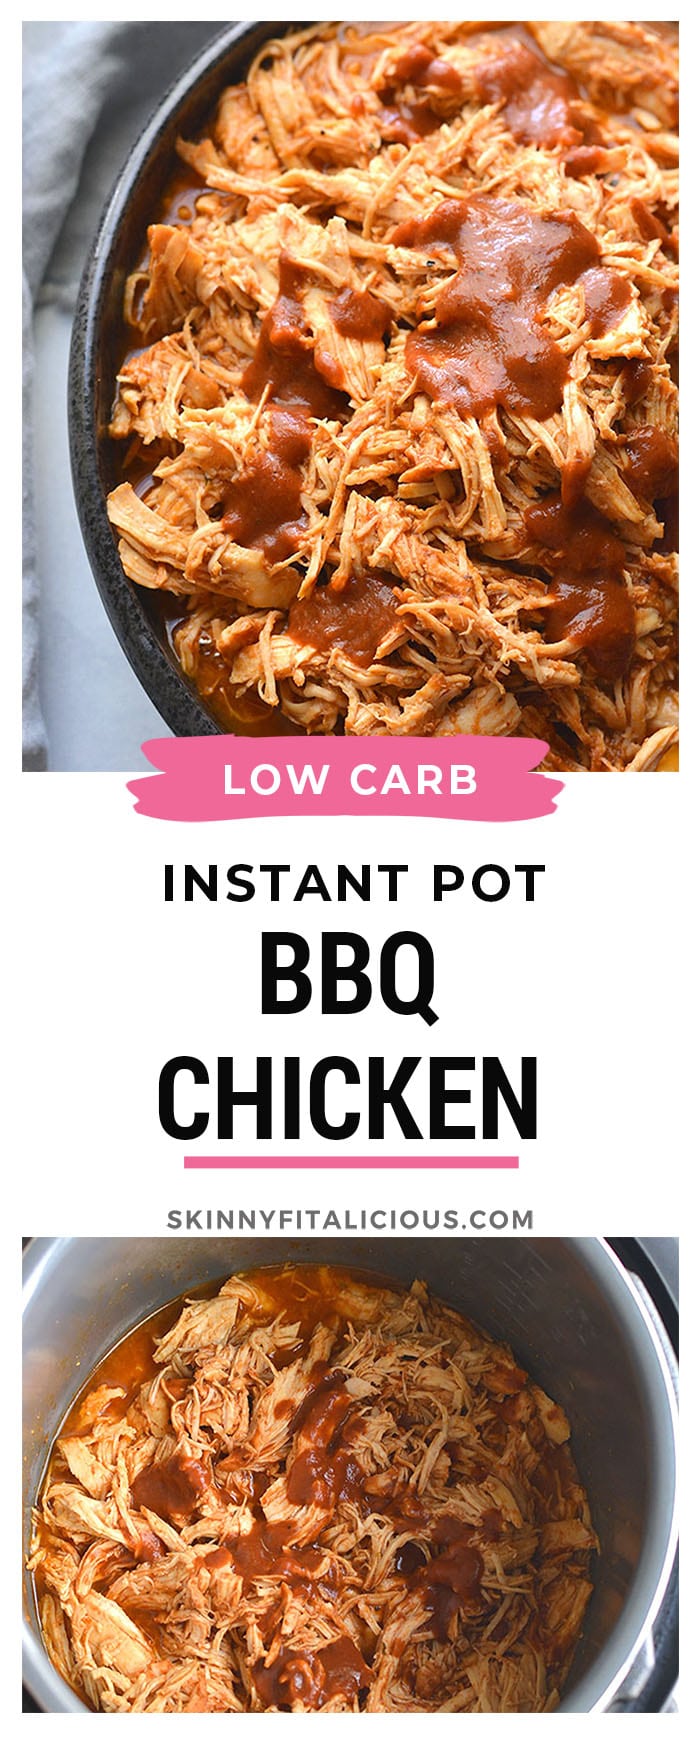 Instant Pot Low Carb BBQ Chicken! Make with a no sugar added BBQ sauce, this Whole30 friendly recipe is quick to make in an Instant Pot in 30 minutes. Toss on a salad, over bread, rice, cauliflower rice or sweet potatoes for an easy meal. Whole30 + Low Carb + Paleo + Gluten Free + Low Calorie